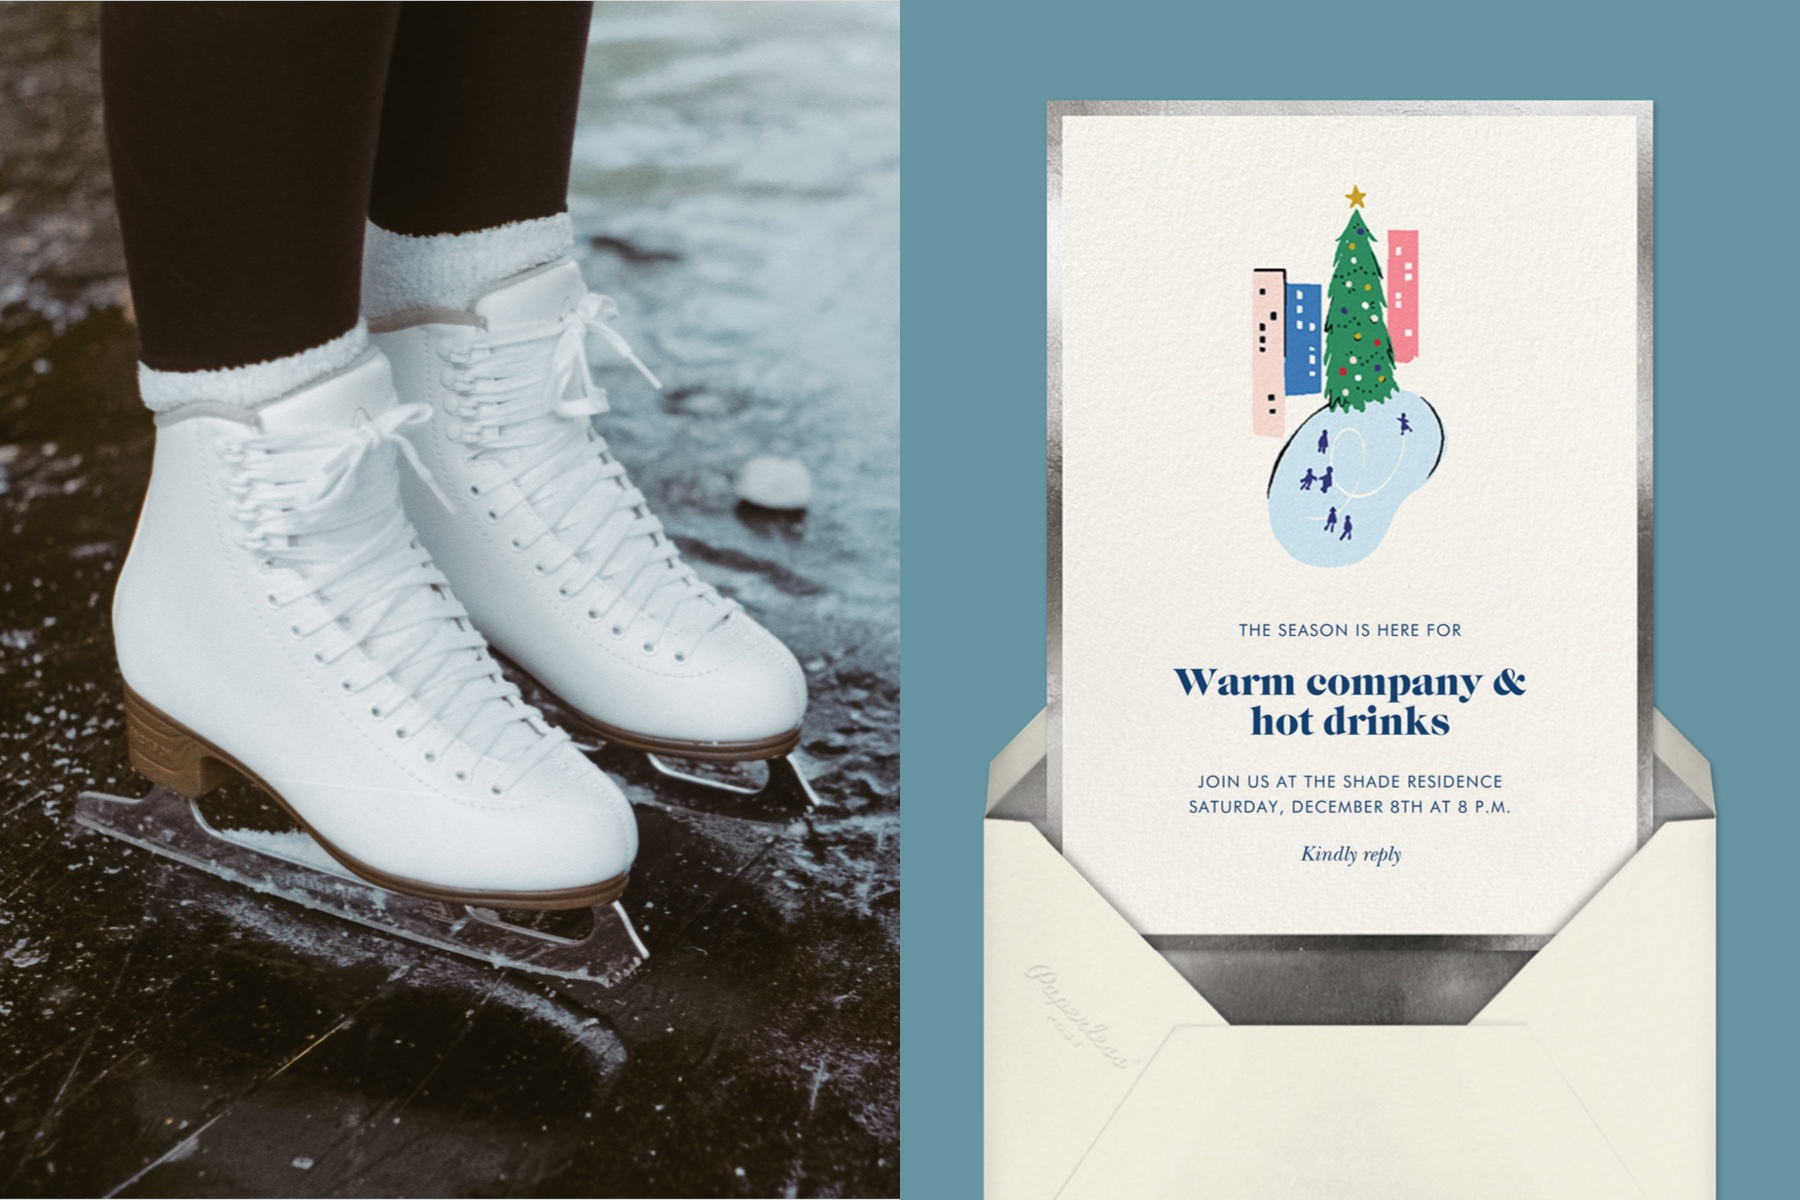 Left: Someone wears white ice skates on ice. Right: An invitation for a winter get-together. 